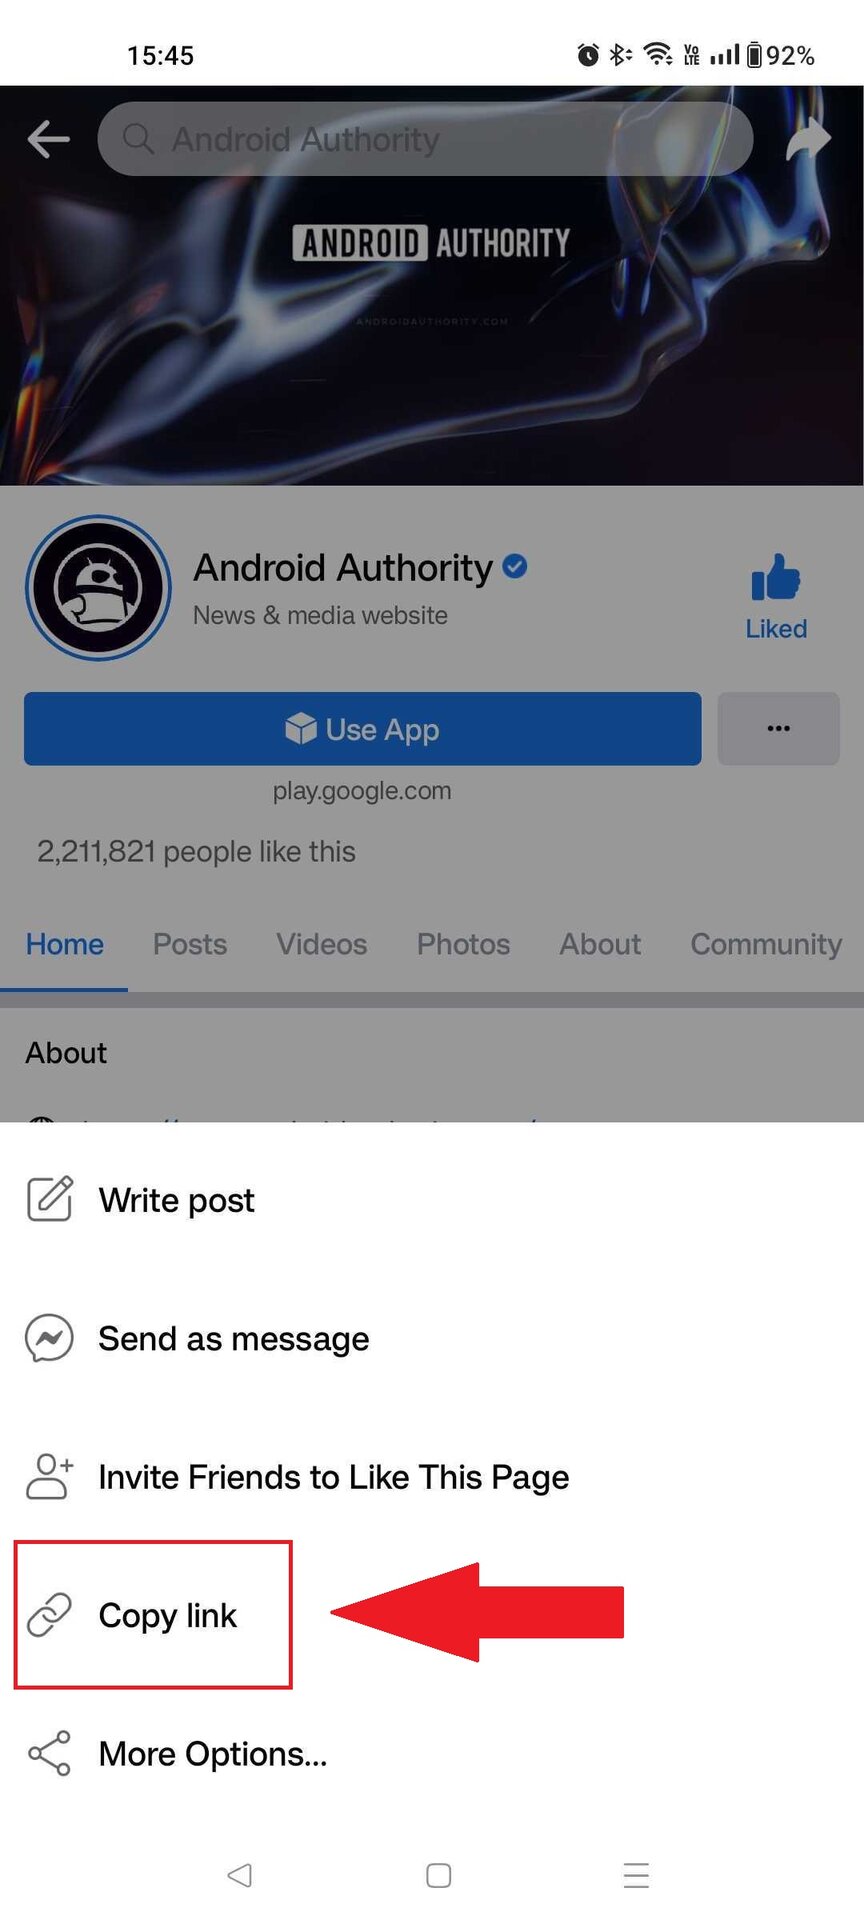 Android Authority Facebook Page Share Options